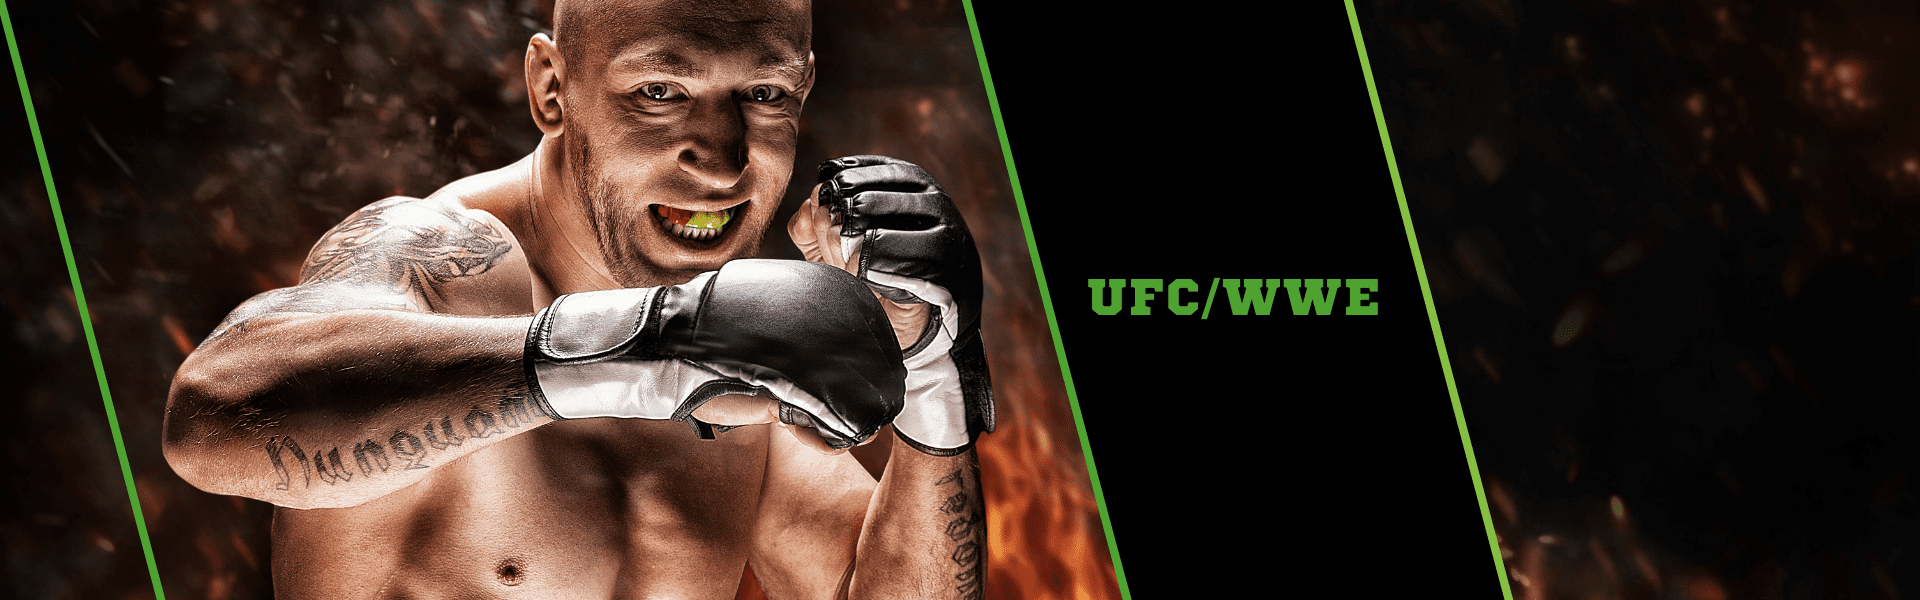 Froggers House of Cards - UFC WWE